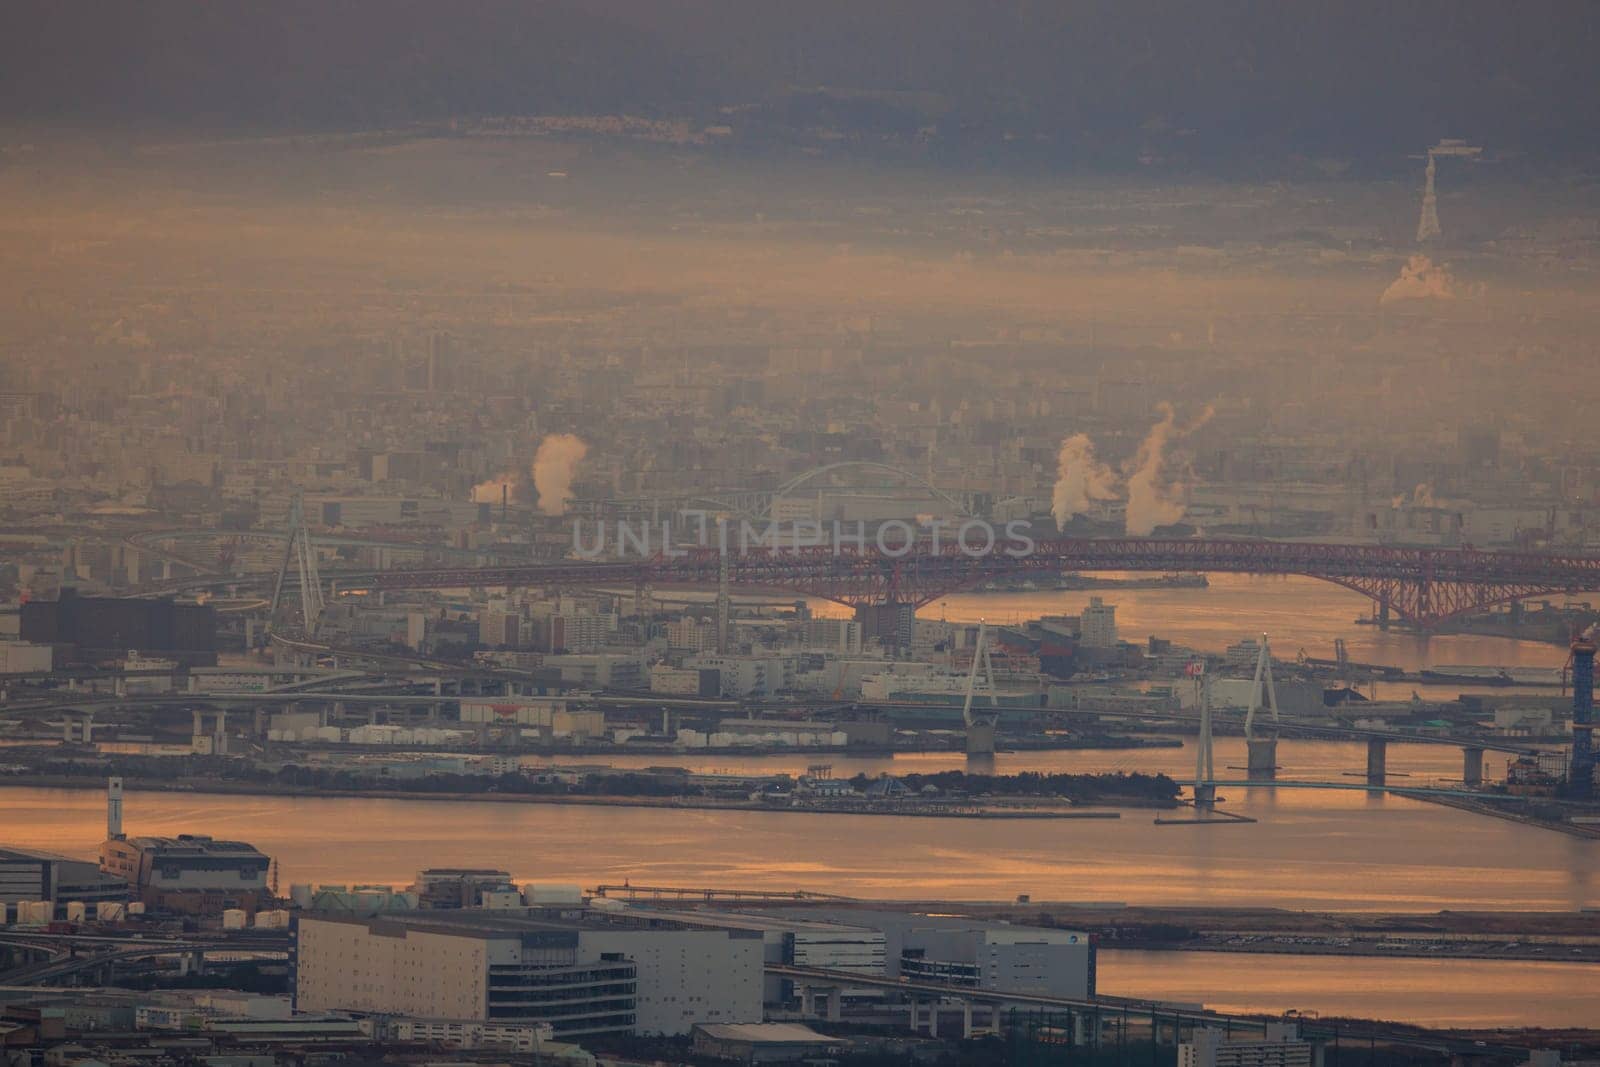 Smoke mixes with atmospheric haze along industrial riverside at dawn by Osaze